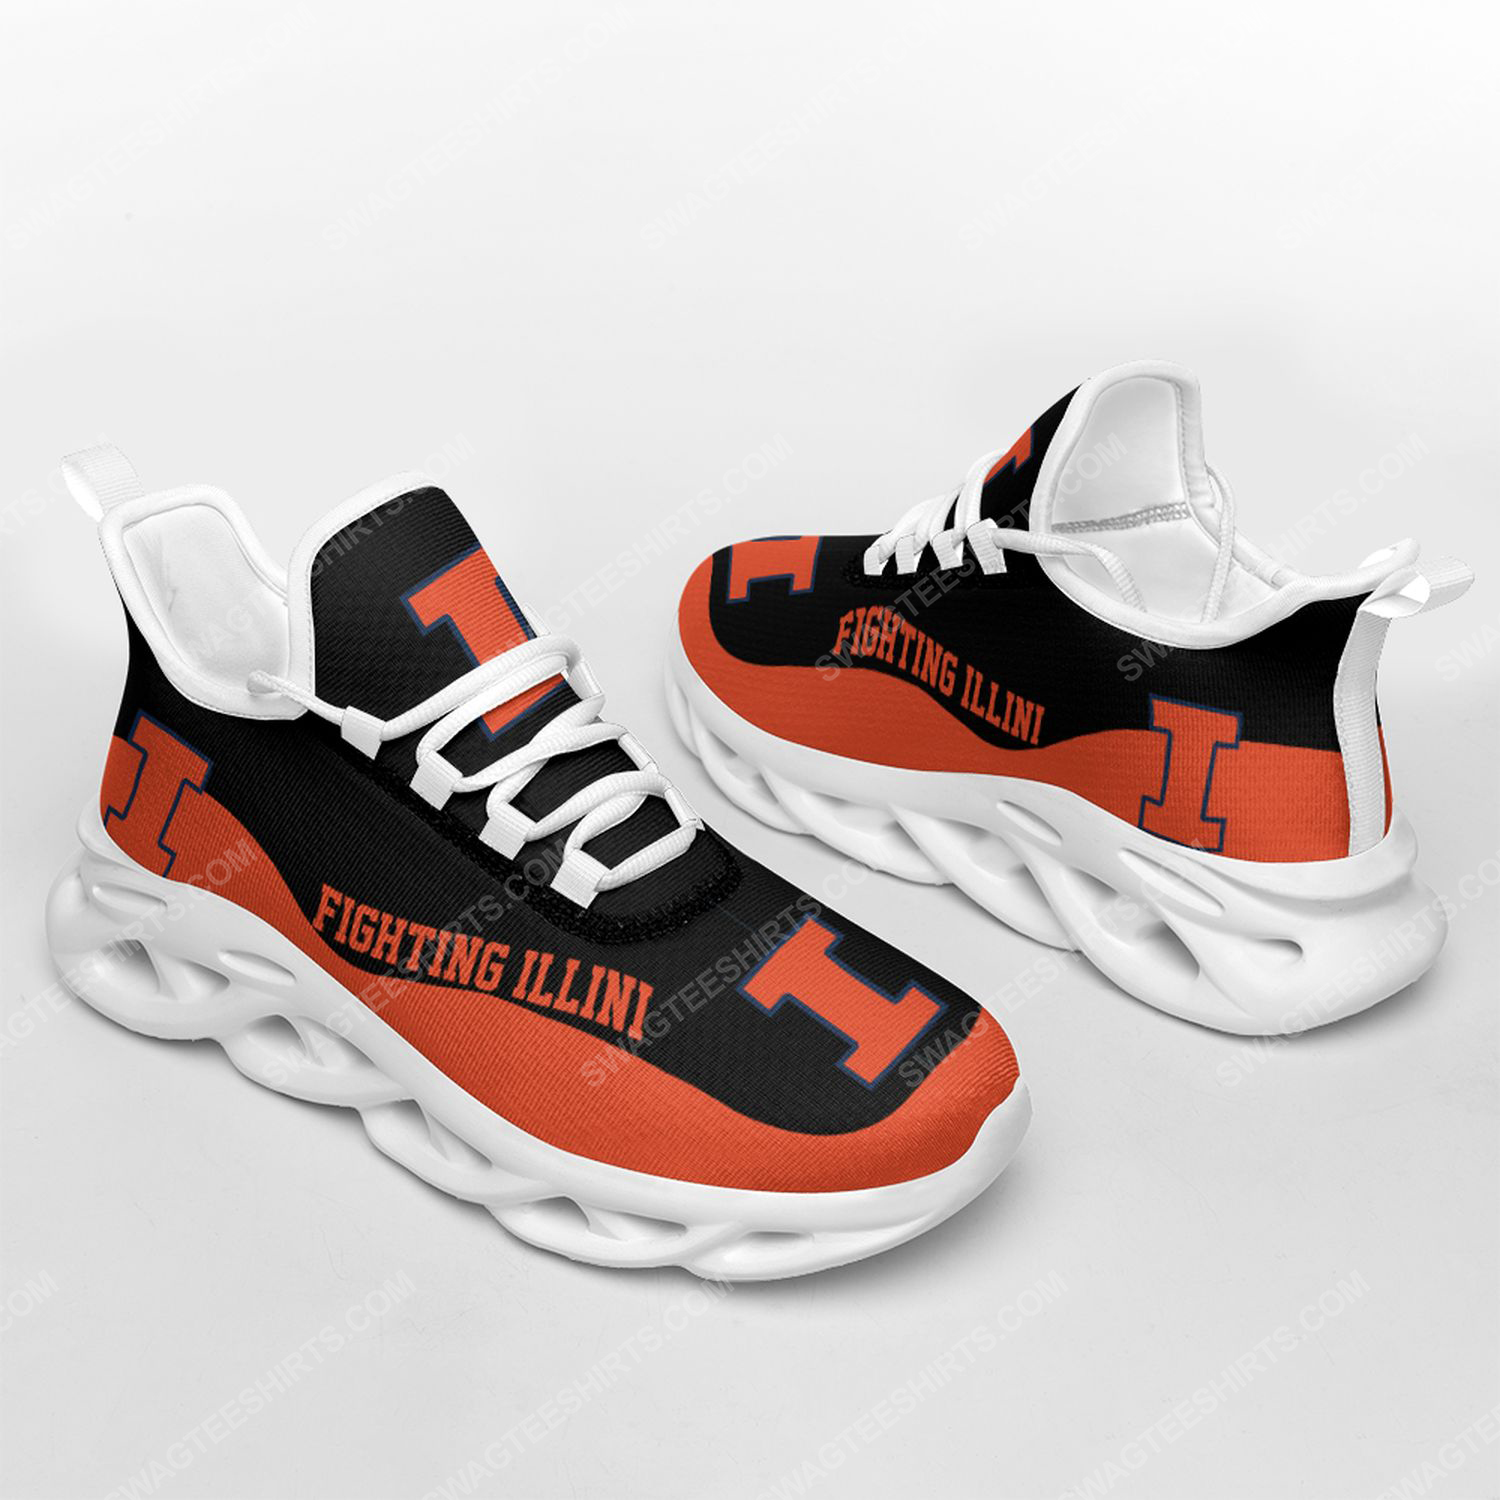 [special edition] The illinois fighting illini football team max soul shoes – Maria